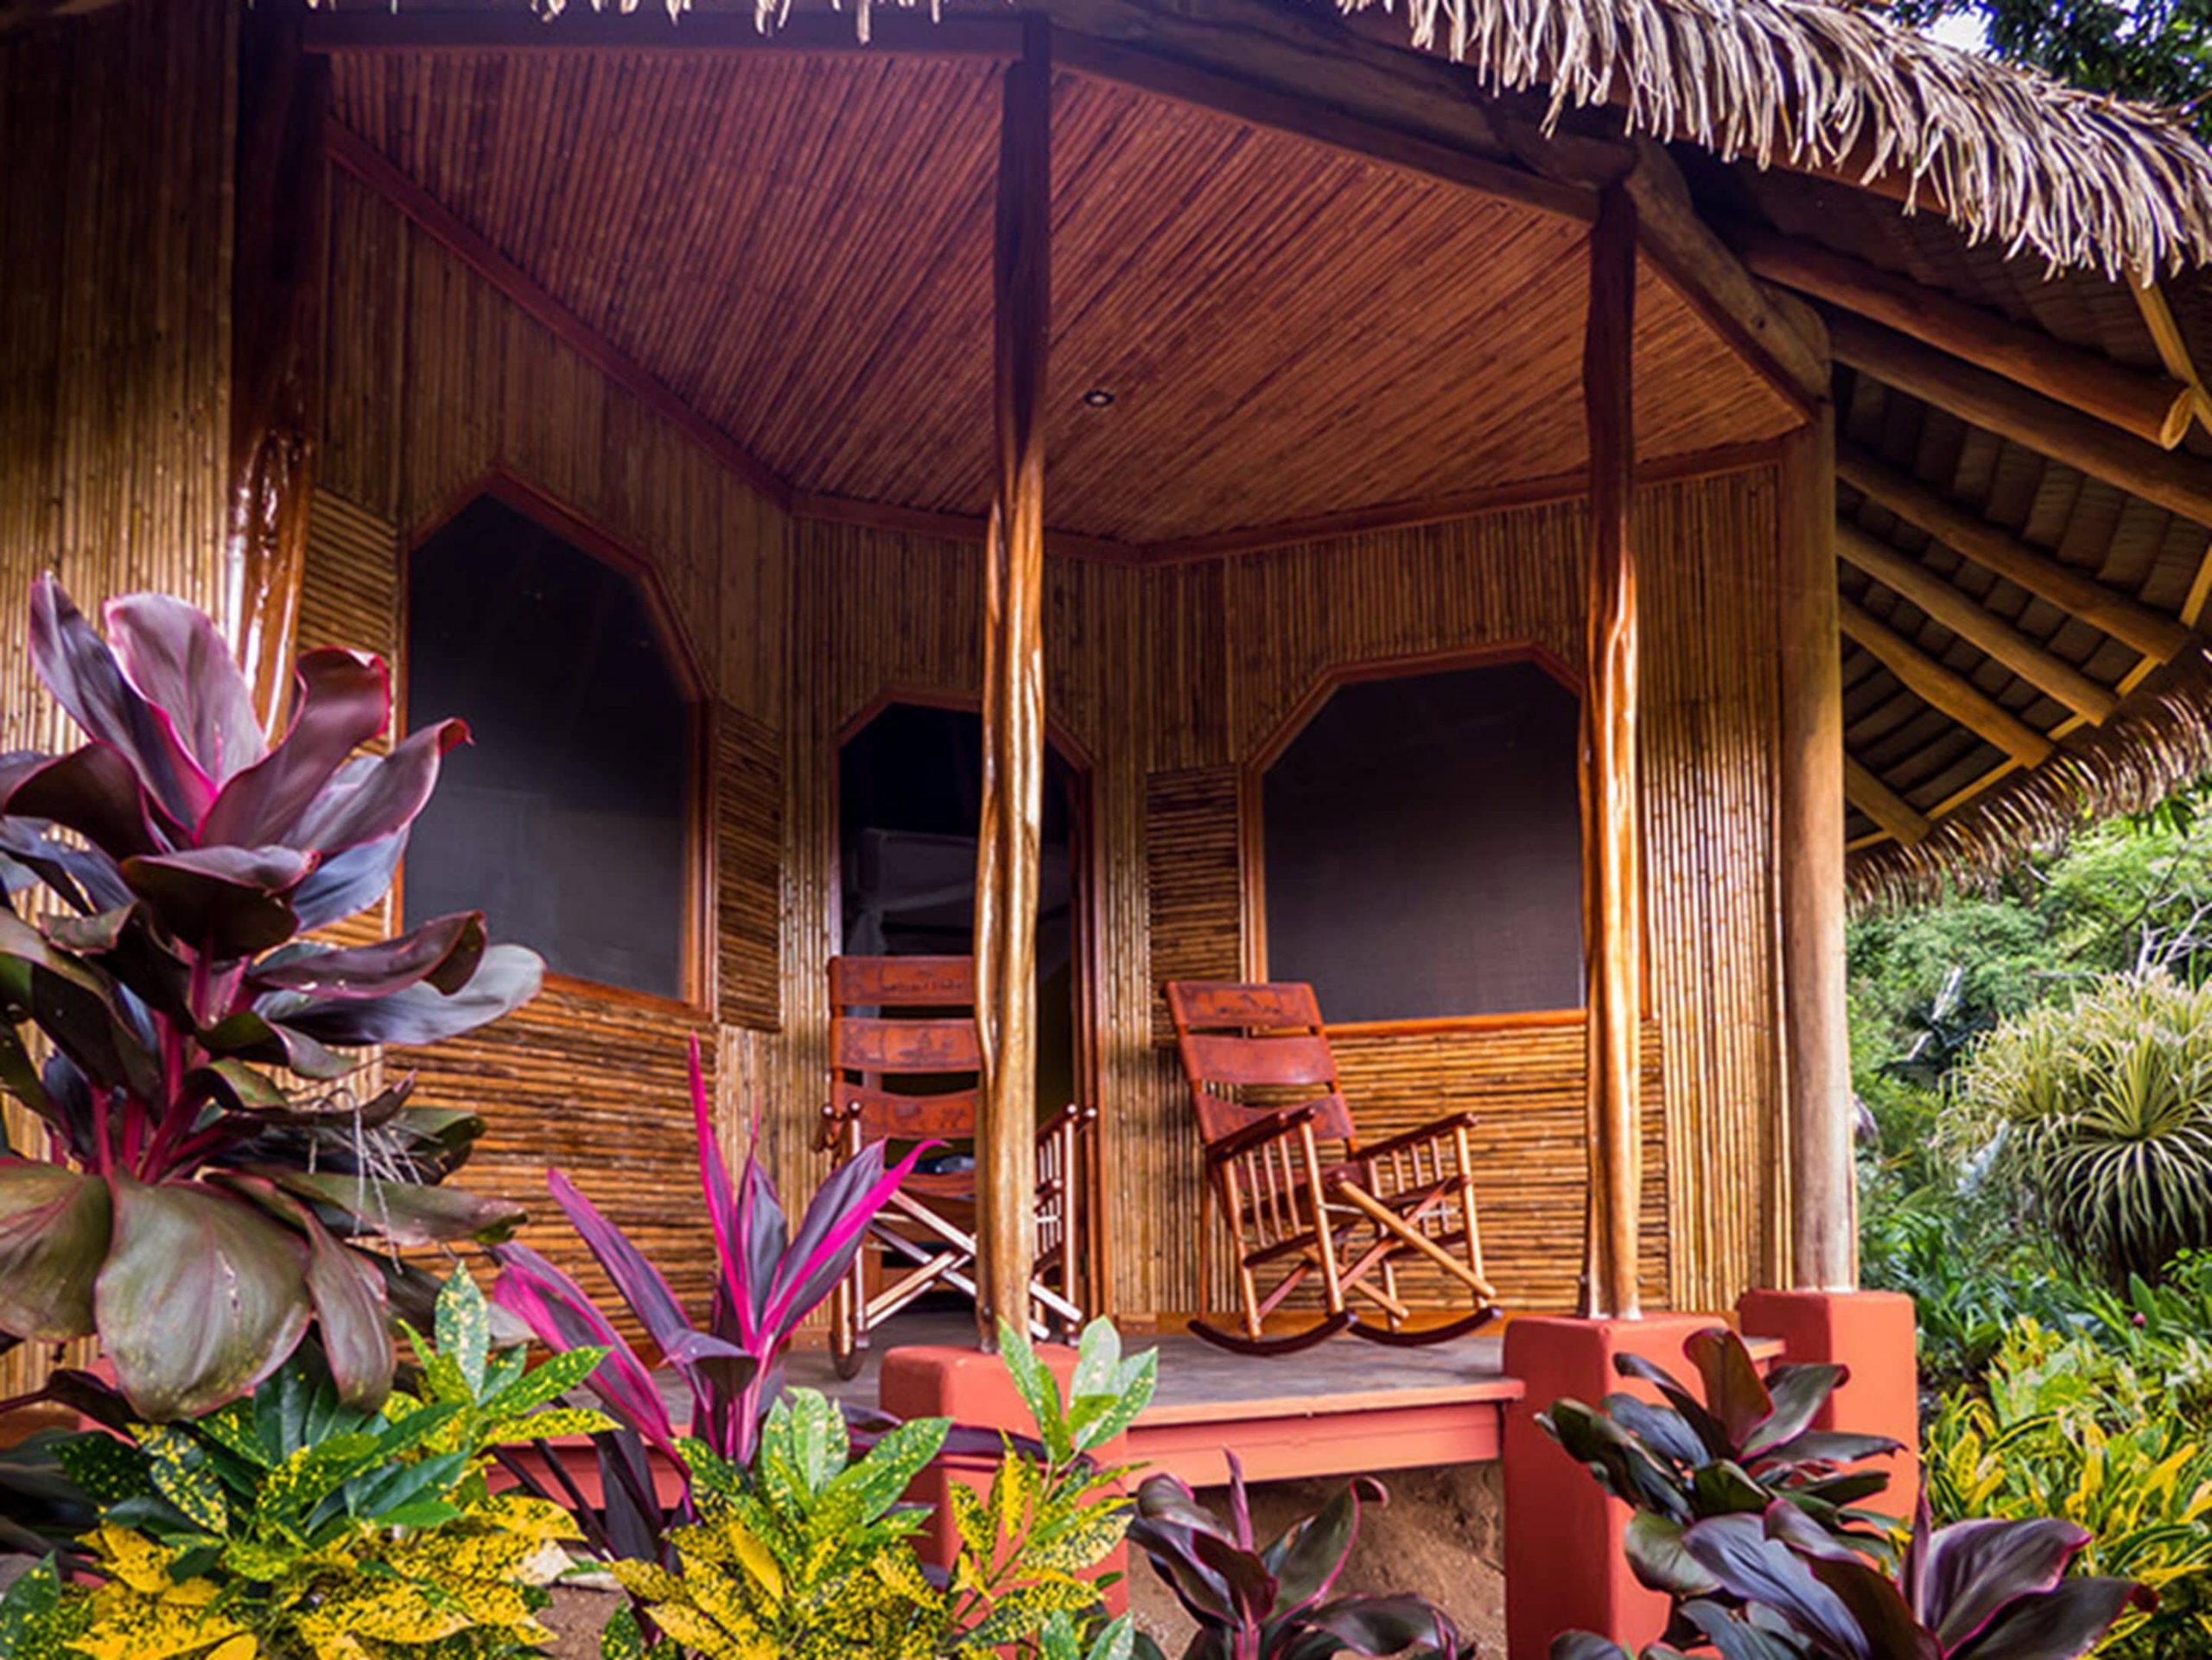 An outdoor deck with rocking chairs and colorful plants in the surrounding jungle of a private villa offered to guests of Luna Lodge in Costa Rica.